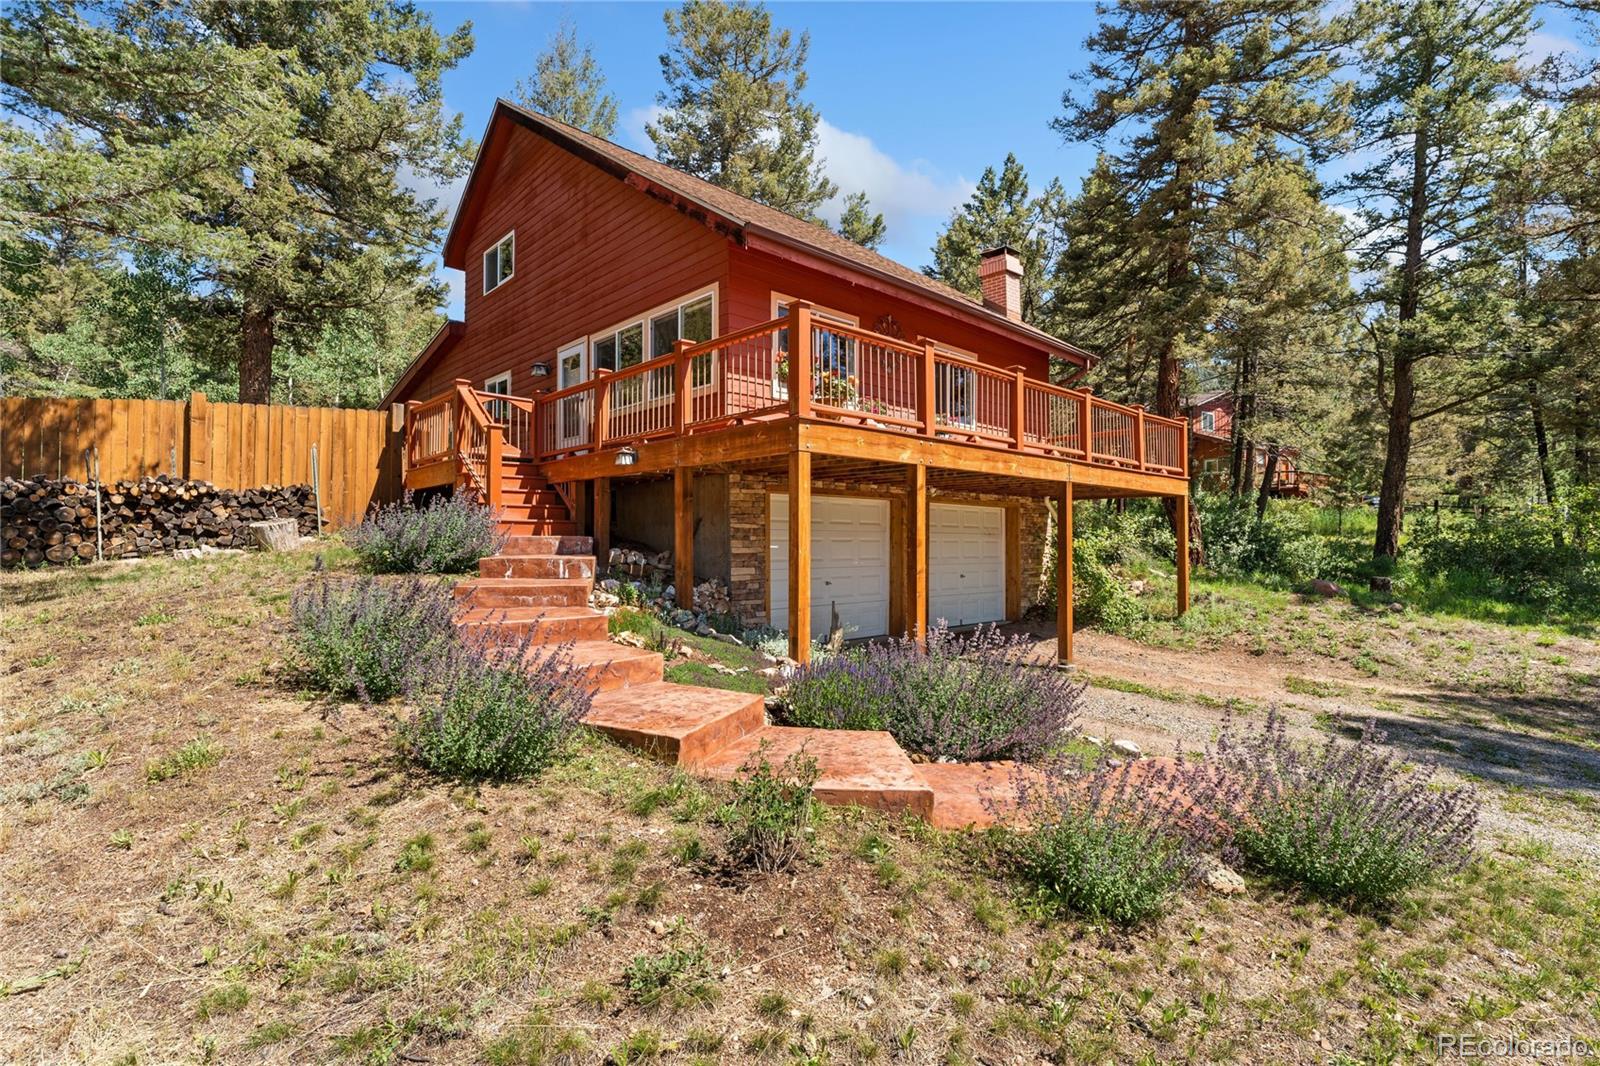 31289  florence road, Conifer sold home. Closed on 2023-11-09 for $668,000.